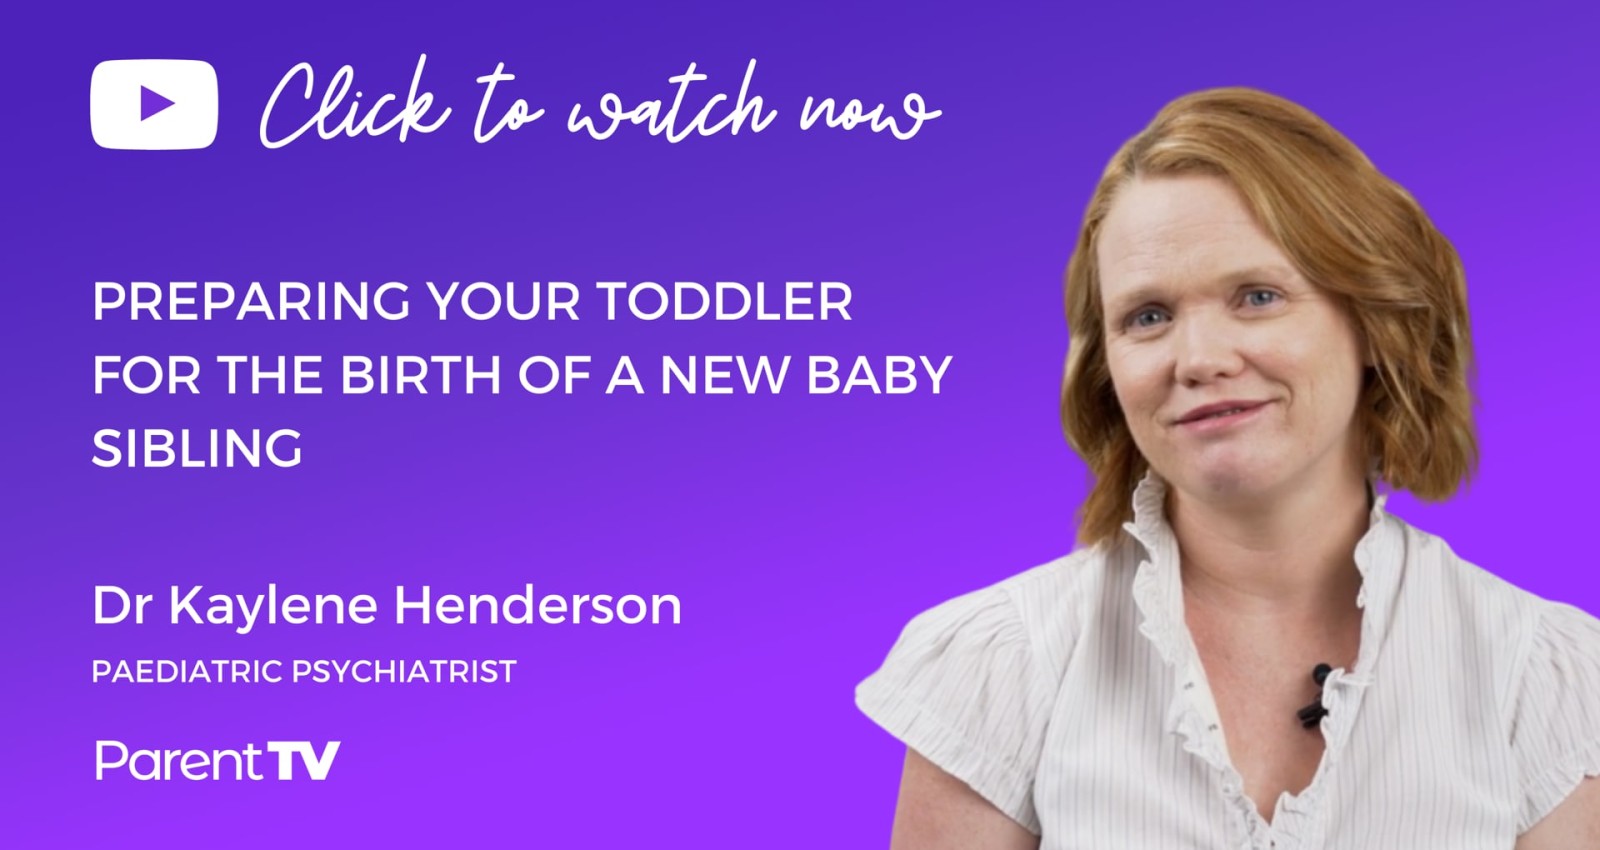 Preparing your toddler for the birth of a new baby sibling